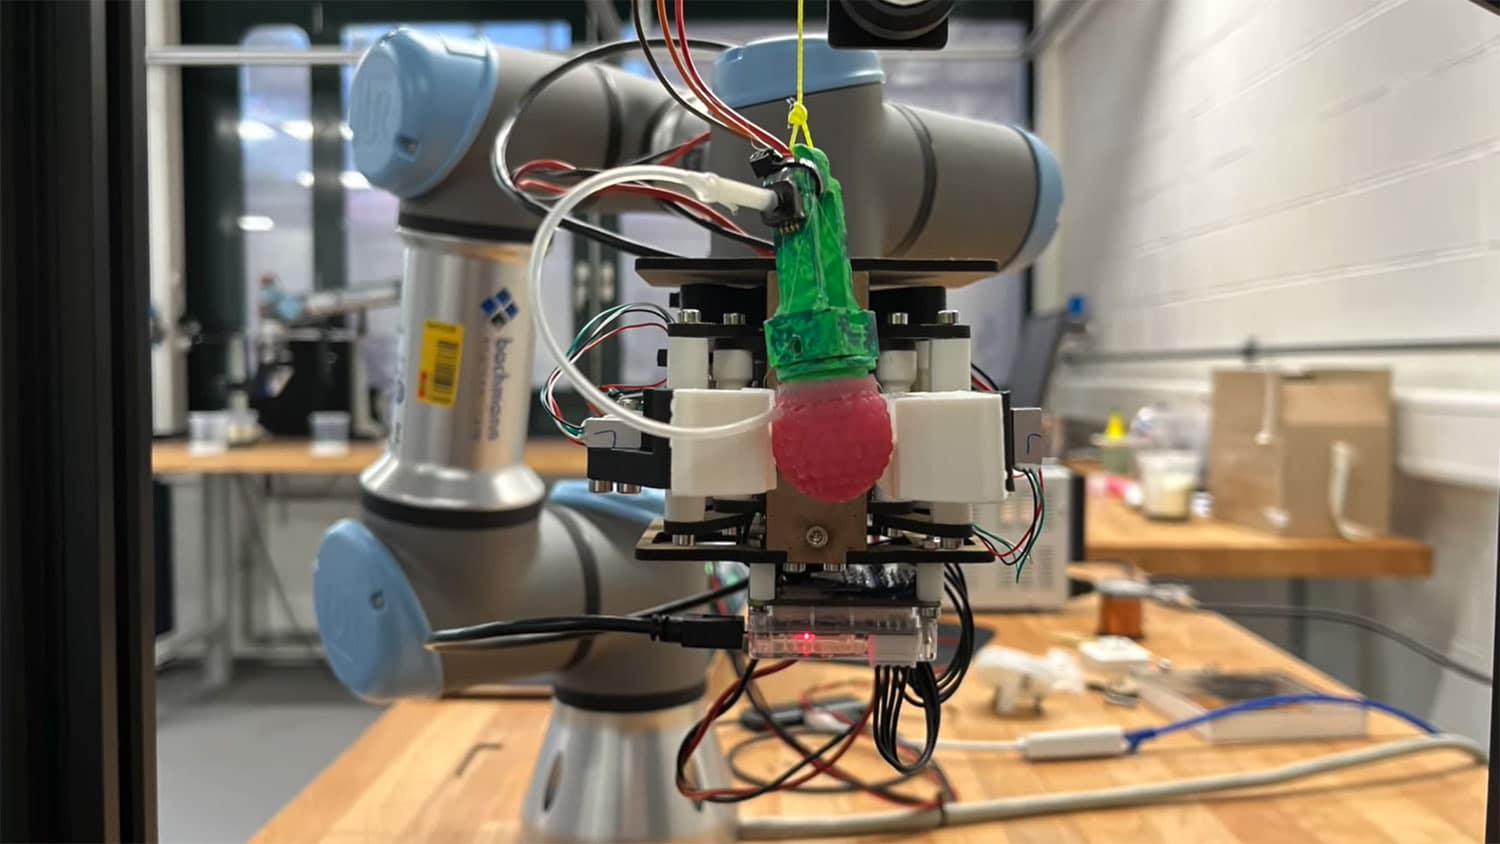 Silicone raspberry used to train harvesting robots.